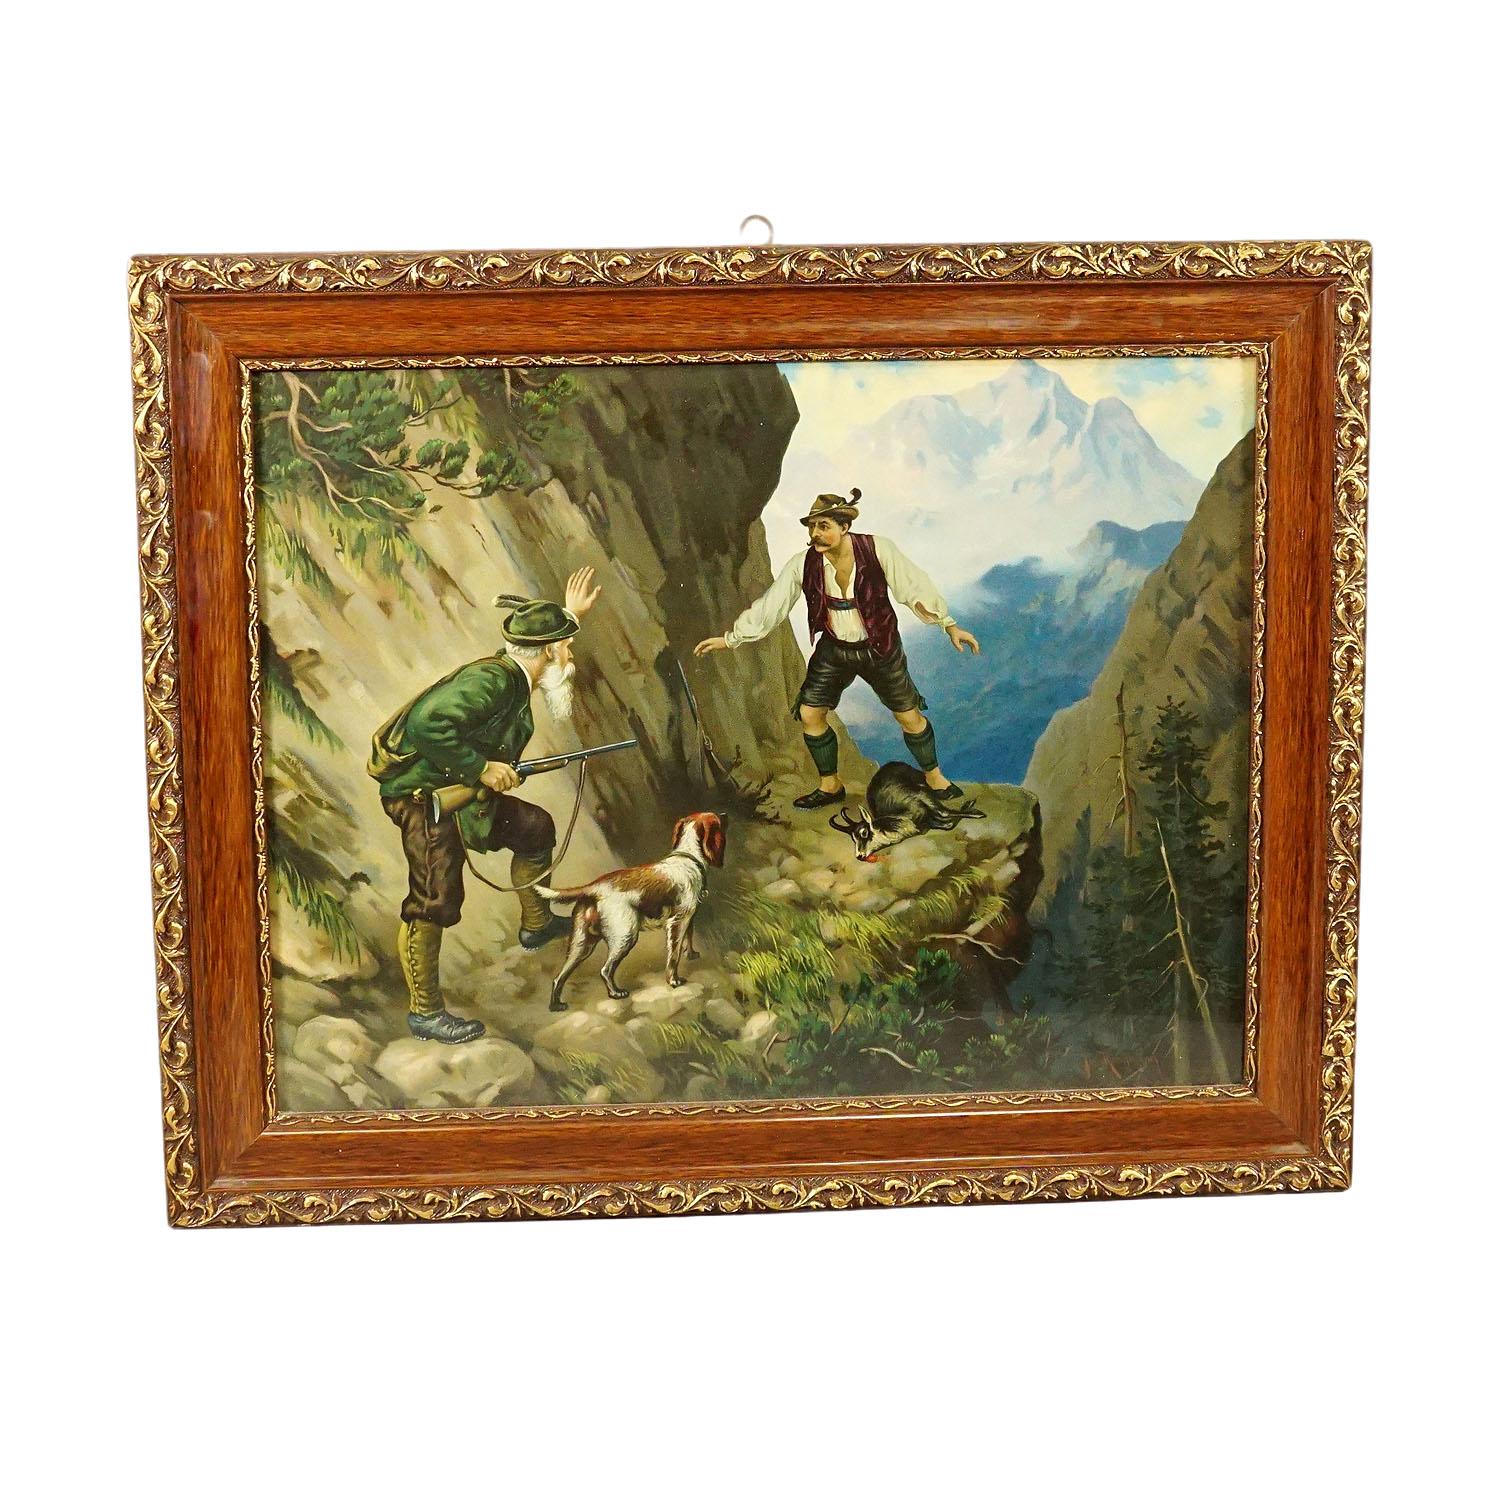 Antique Oil Print with Dramatic Poacher Scene after Josef Ringeisen

A colorful oil print depicting a dramatic poaching scenery in the Bavarian forest. A poacher is caught in the act by the hunter and his staghound. The template for this print is